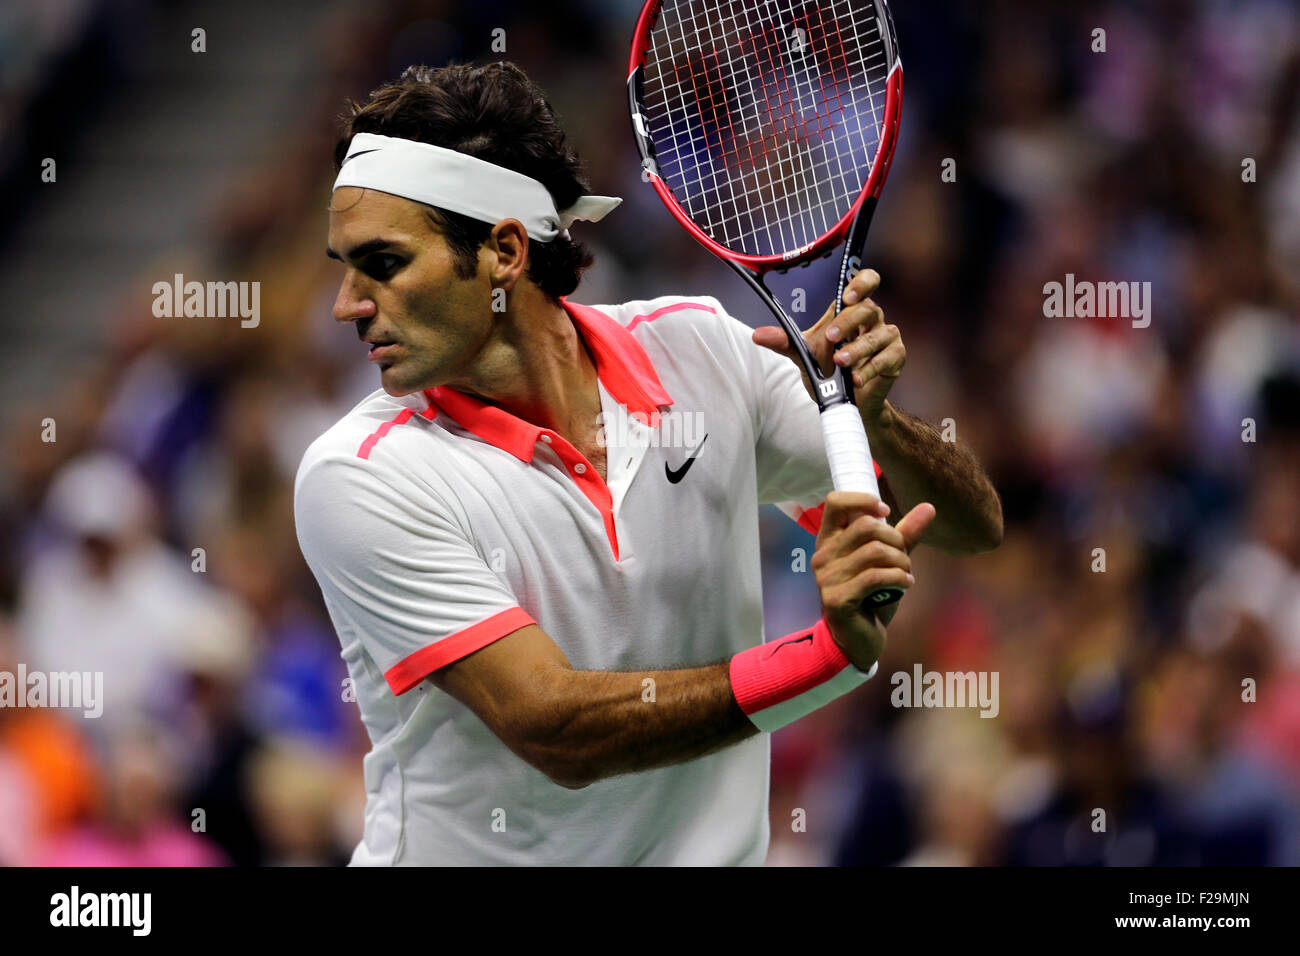 New York, USA. 13th September, 2015. Roger Federer in action against Novak Djokovic of Serbia in the final of the U.S. Open. Djokovic defeated Federer 6-4, 5-7, 6-4, 6-4 to win his second U.S Open title at Flushing Meadows, New York on September 13th, 2015. Credit:  Adam Stoltman/Alamy Live News Stock Photo